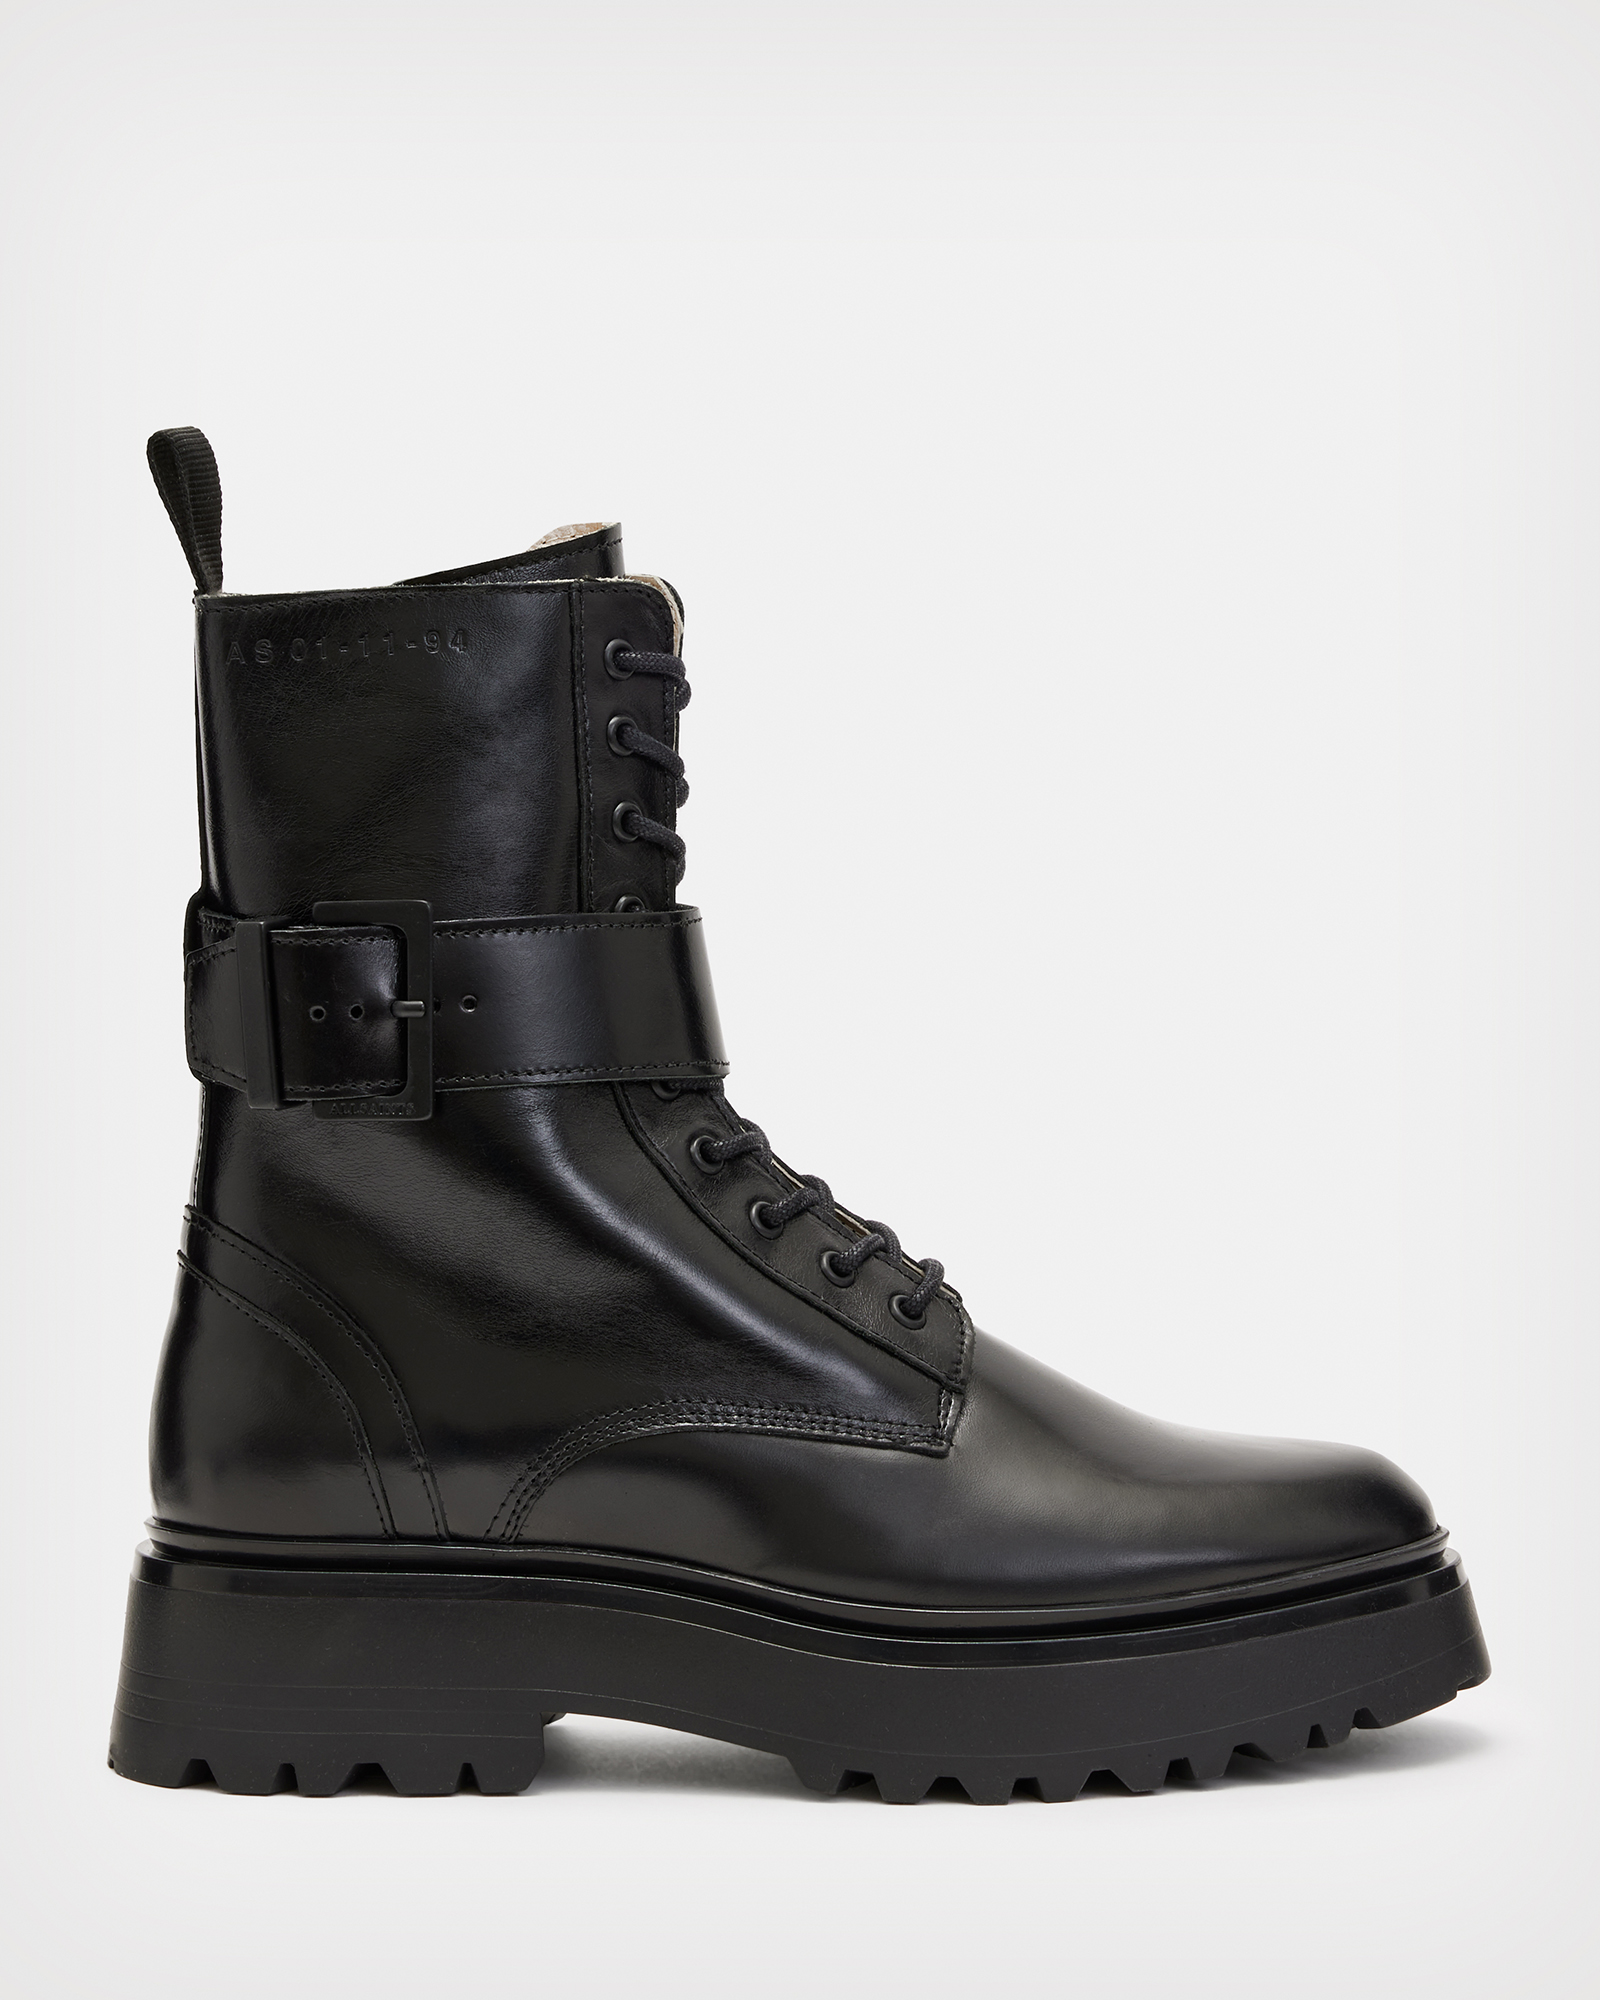 AllSaints Onyx Leather Buckle Boots